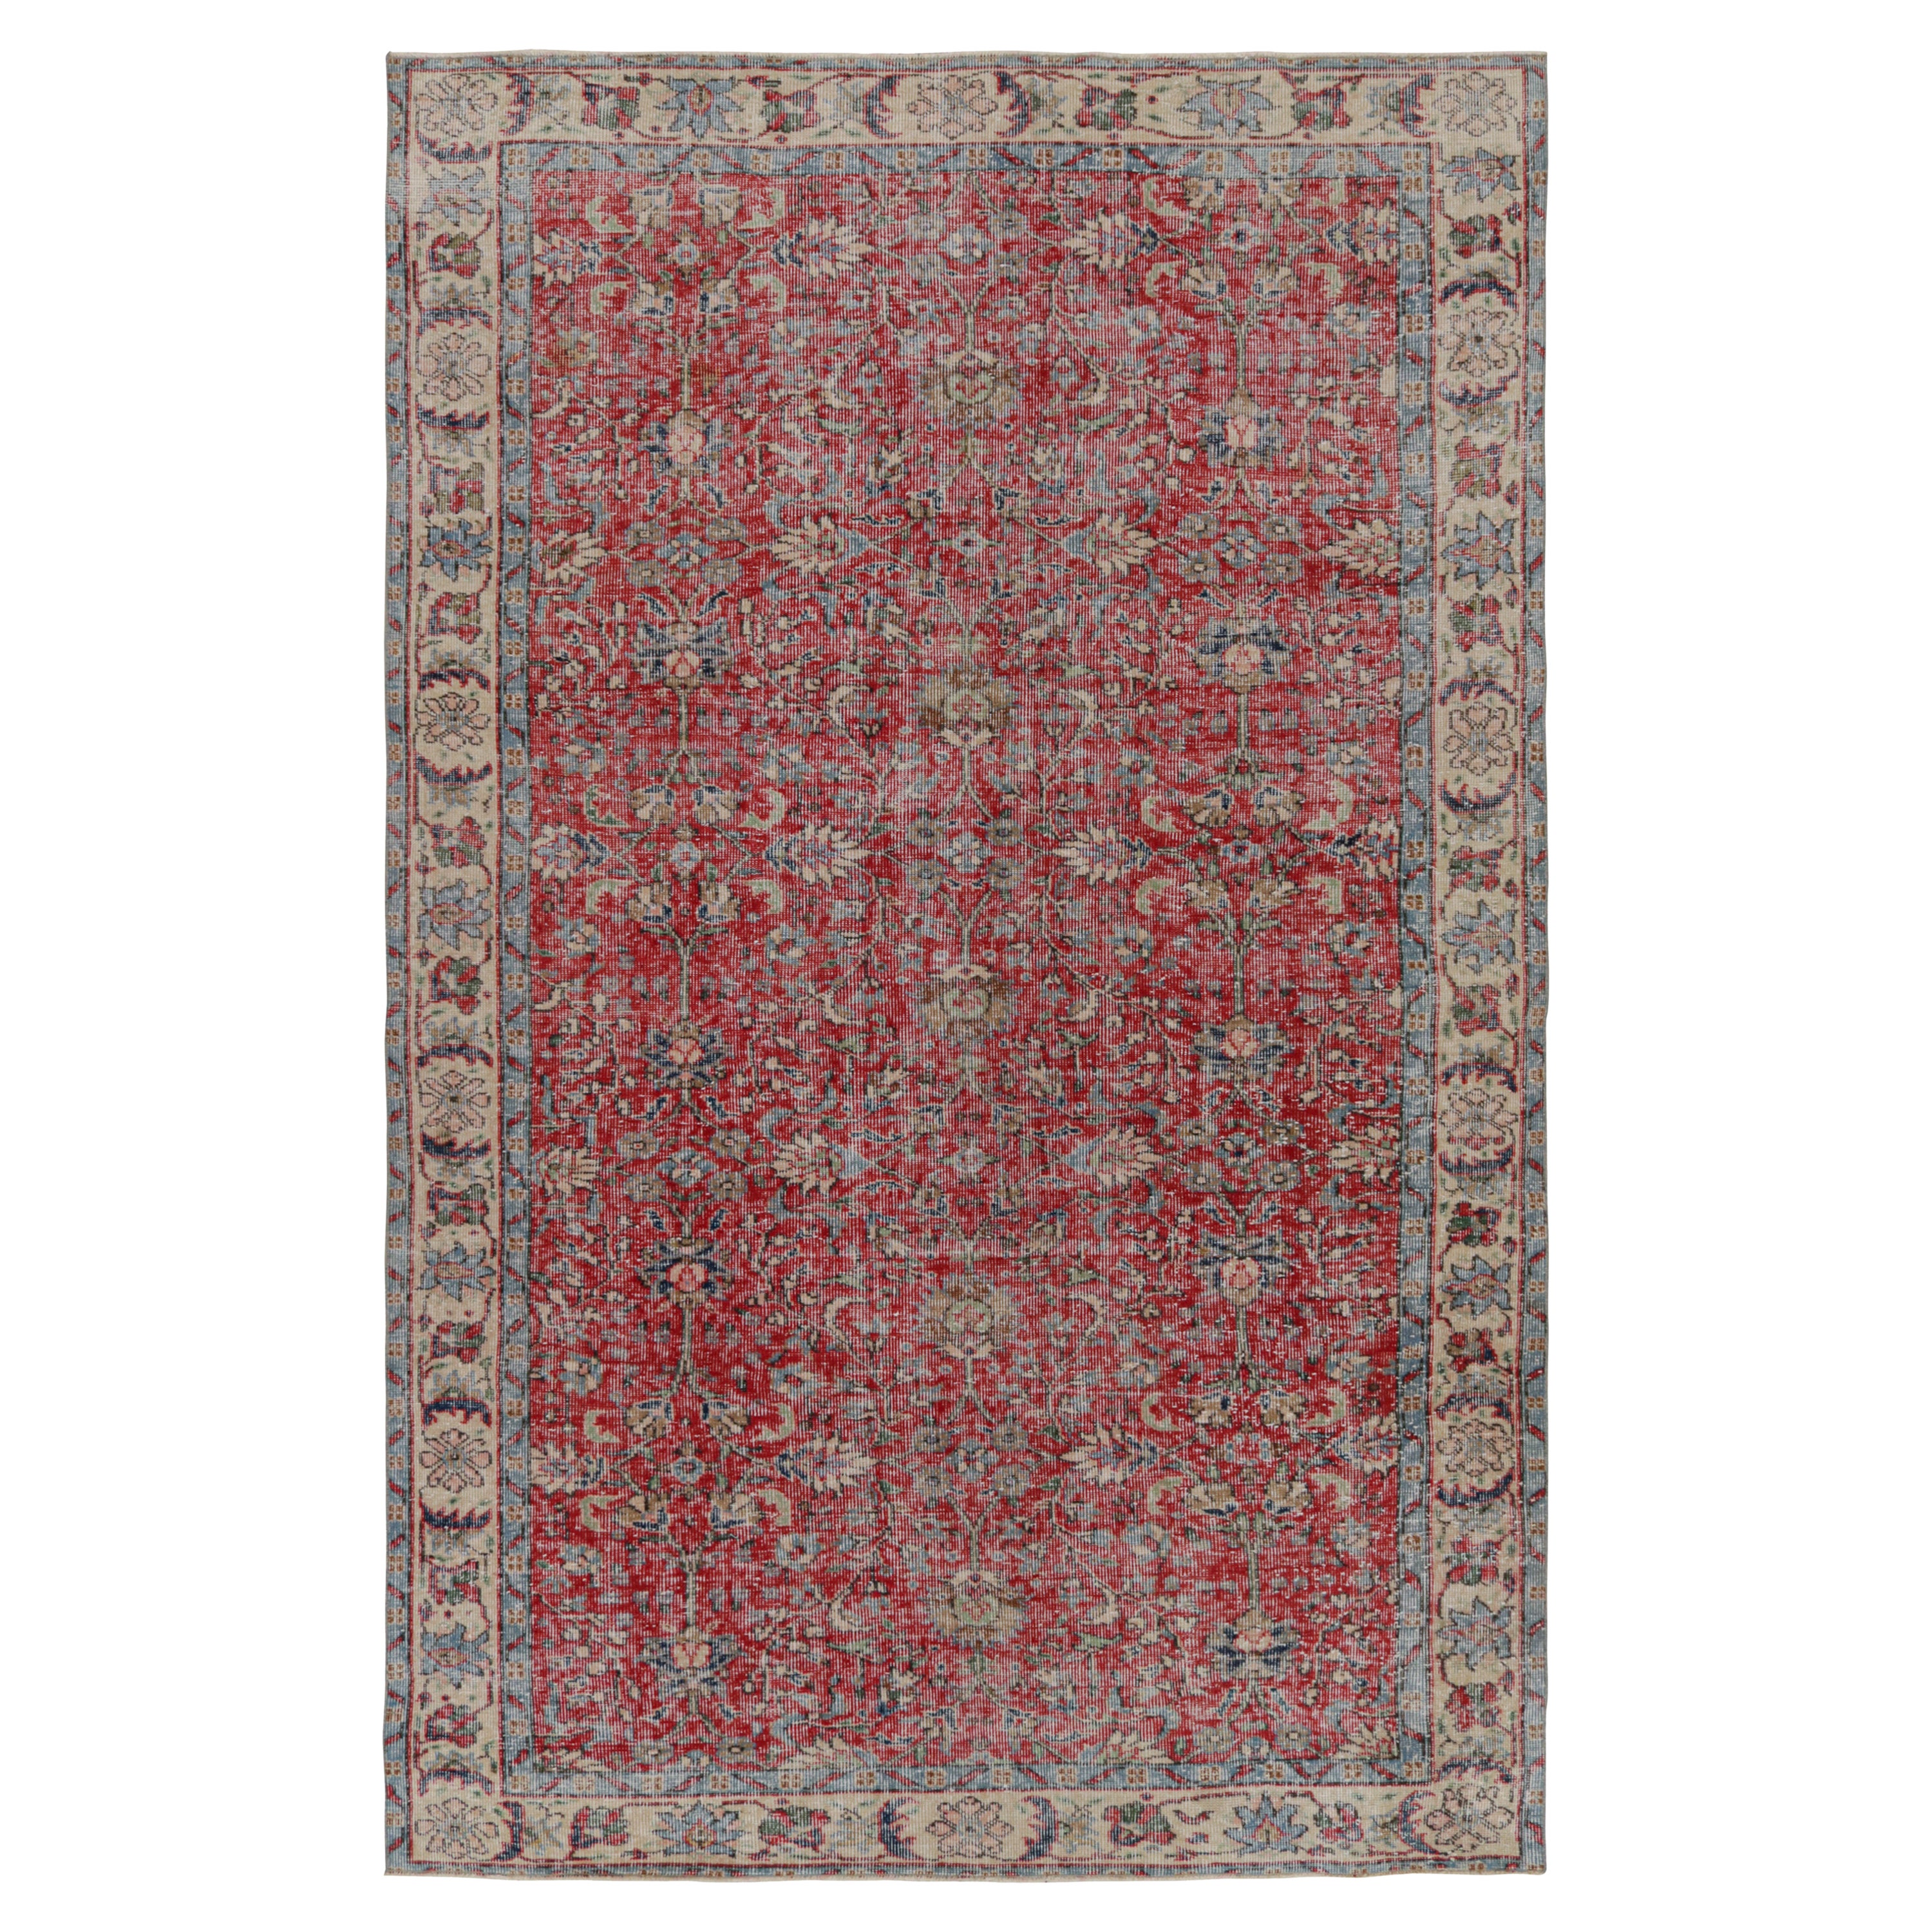 Vintage Turkish Rug in Red with Floral Patterns, from Rug & Kilim For Sale